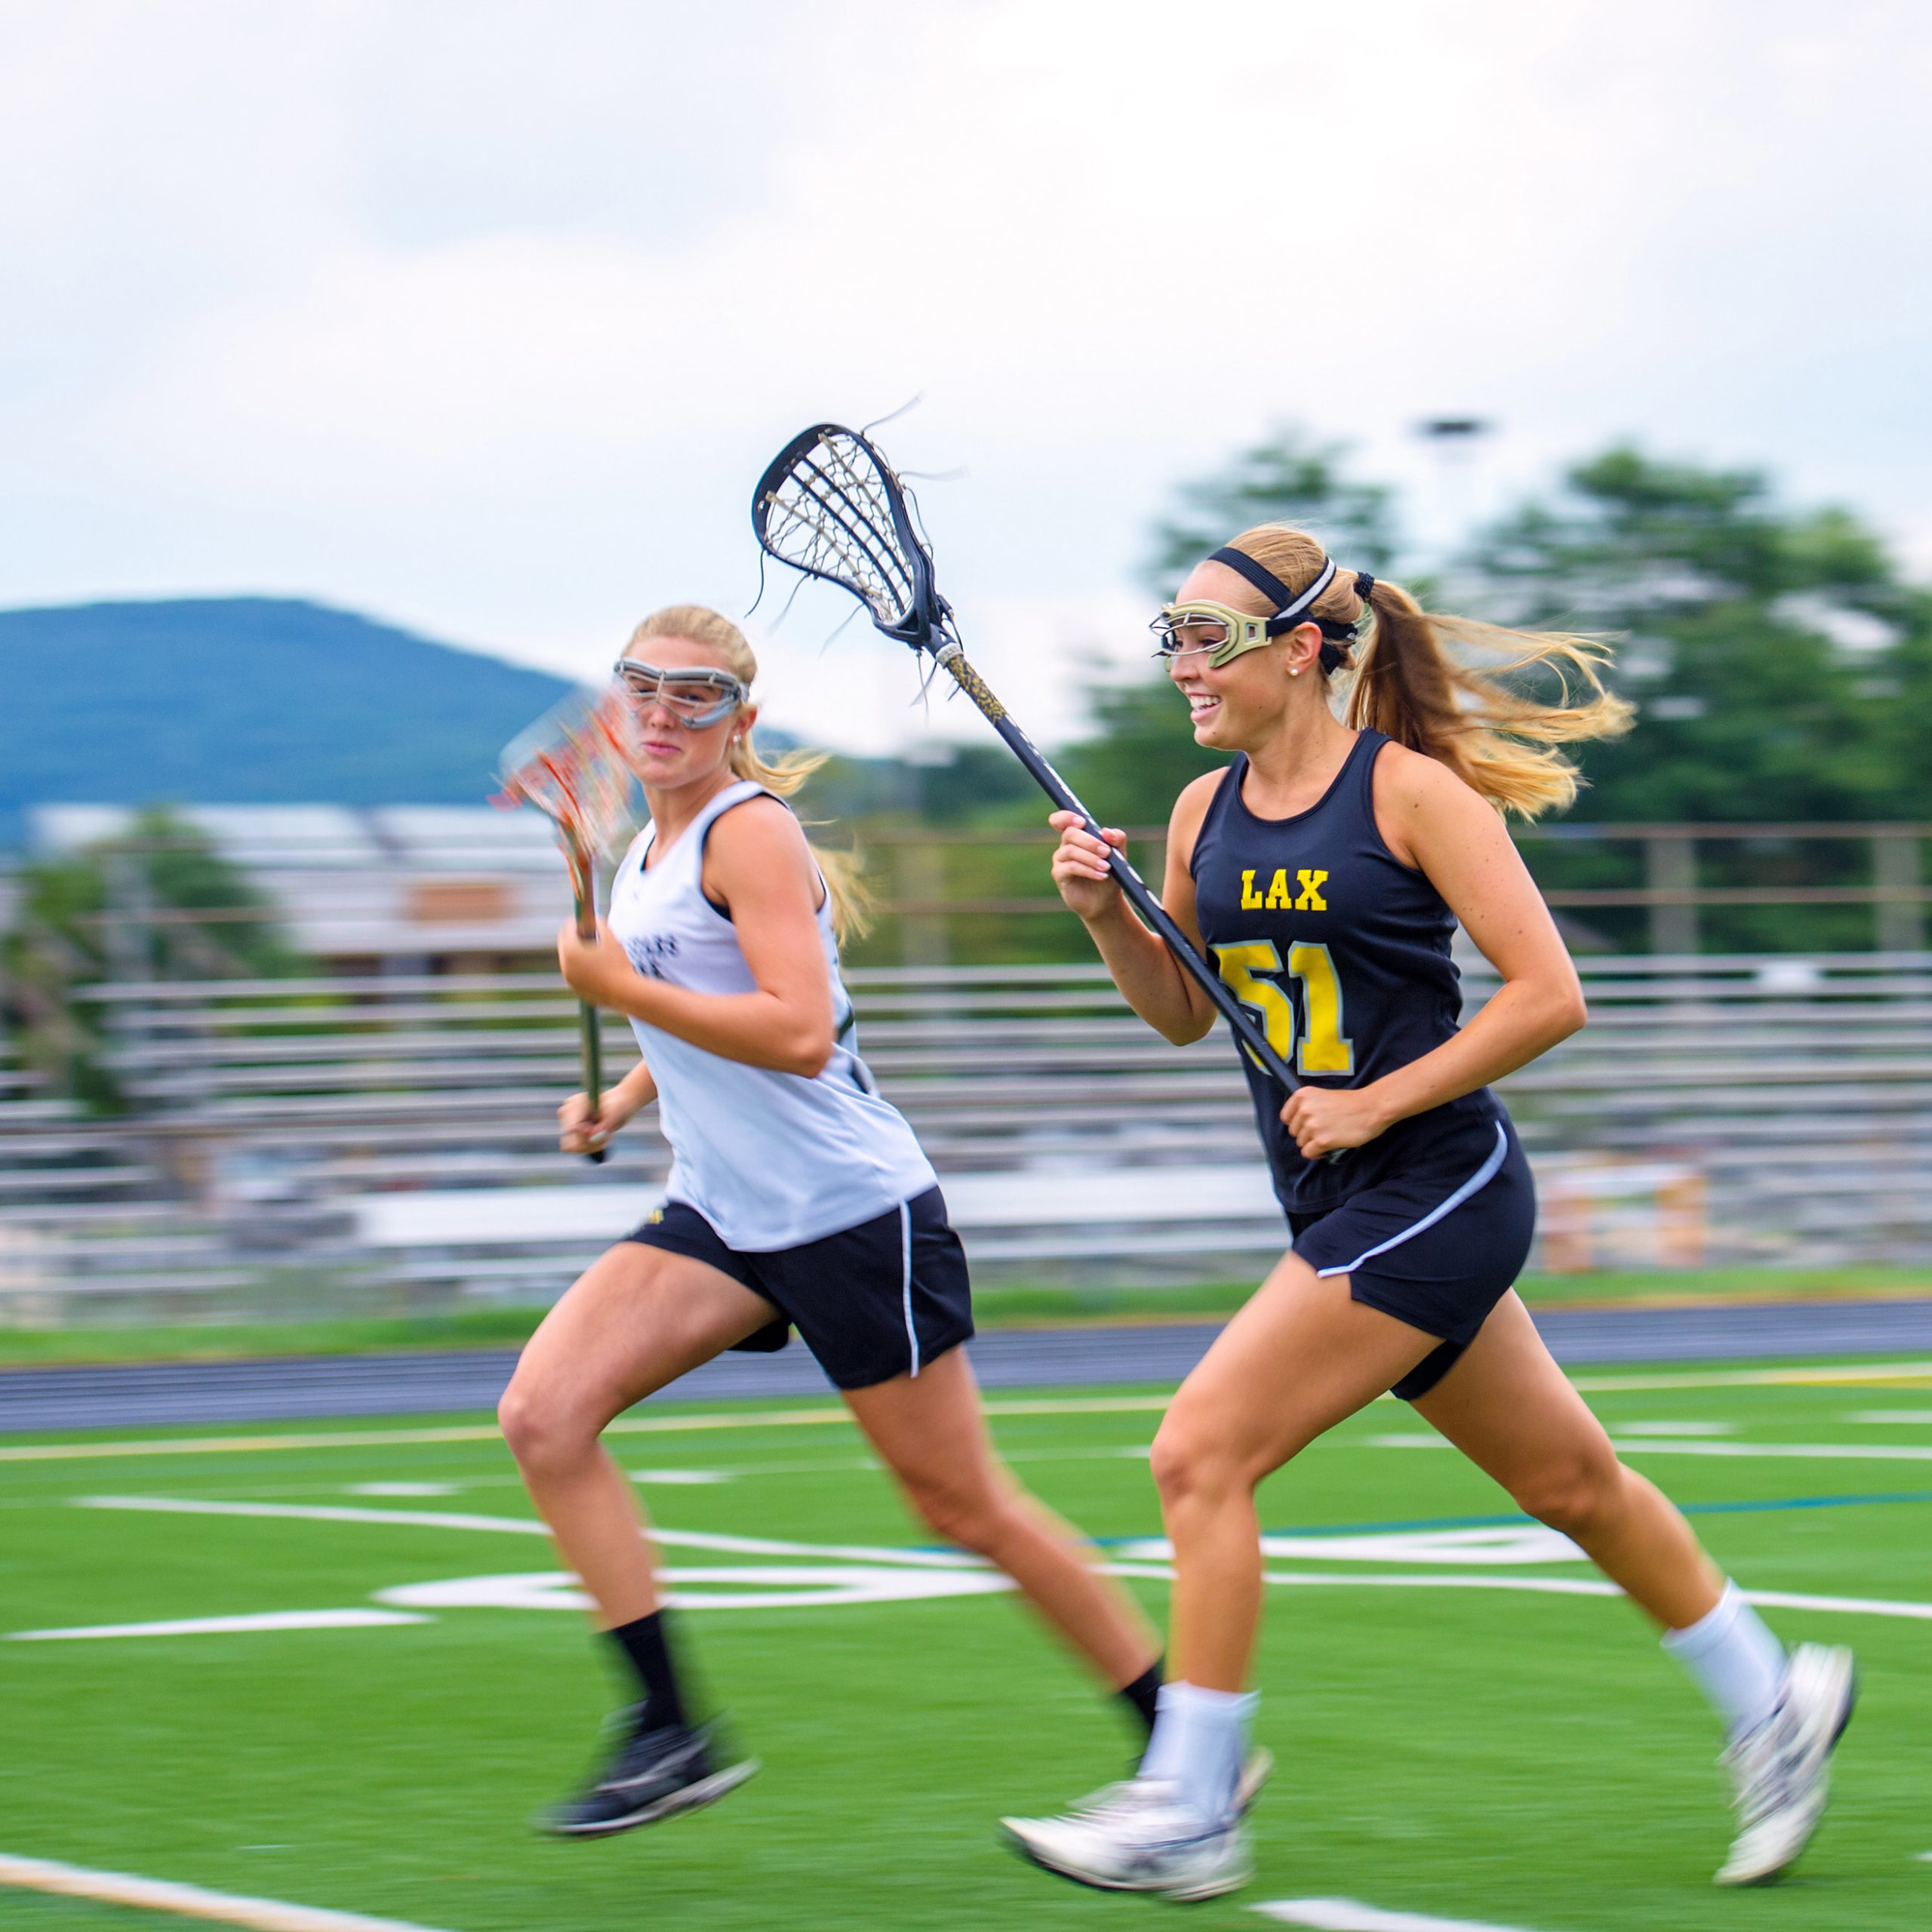 Two teenaged girls playing lacrosse on an outdoor field wearing eye protection.